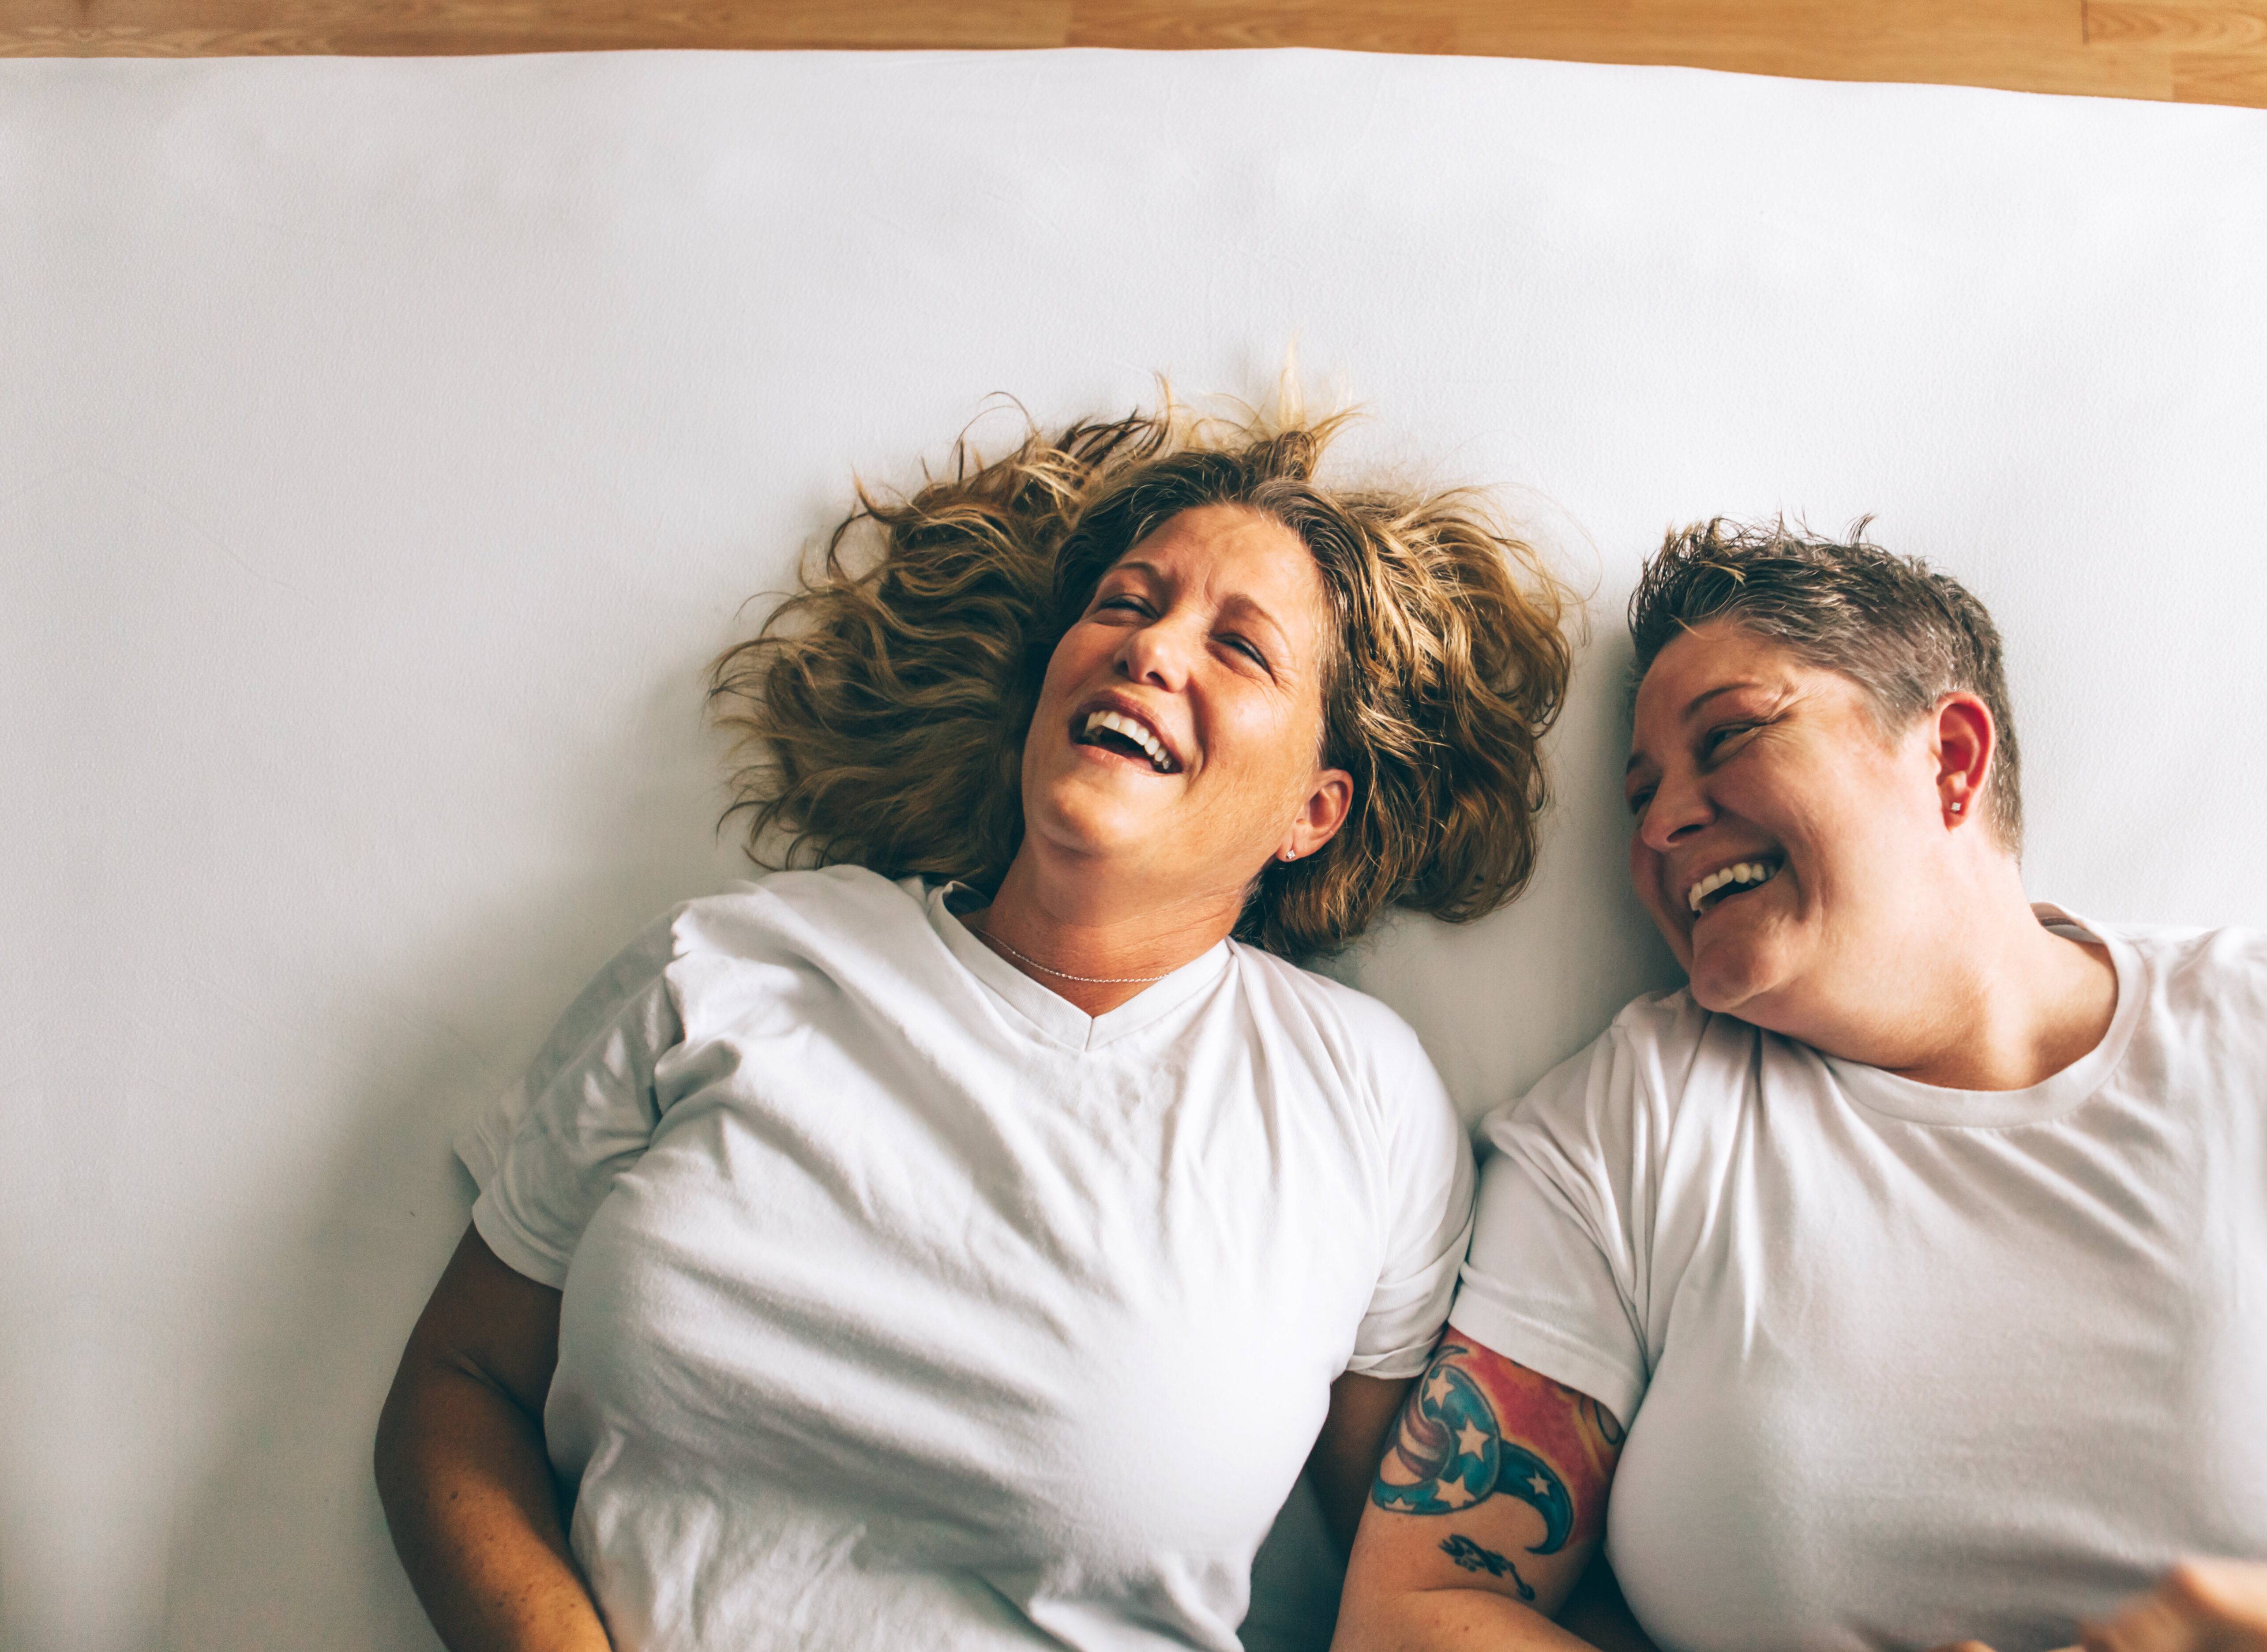 A same-sex couple laying next to each other in bed, laughing